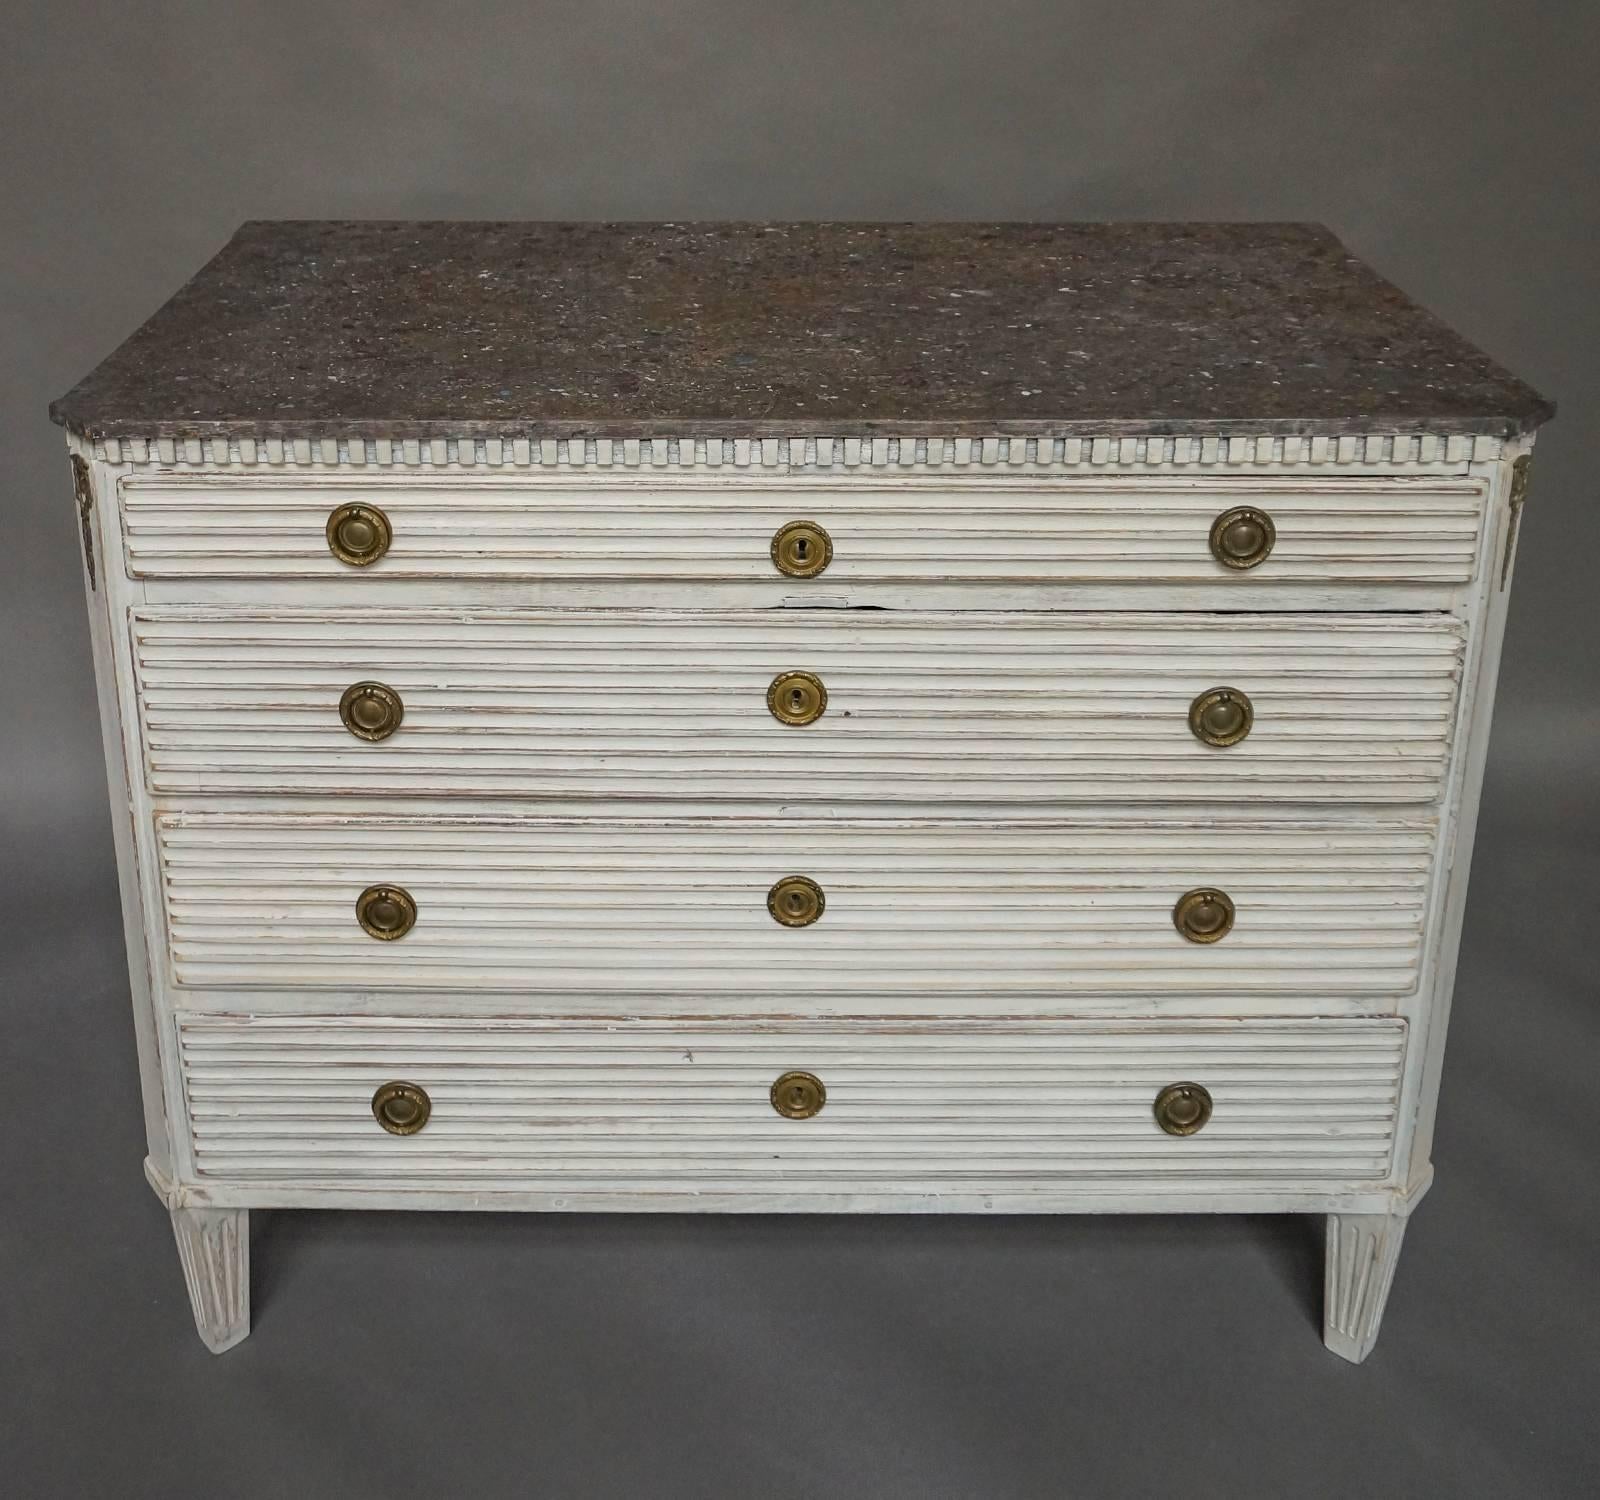 Late Gustavian chest of drawers, Sweden, circa 1800, with faux porphyry top. Each of the four drawer fronts has raised reeding and original brass pulls and escutcheons. Dentil molding around the top and canted corners with brass detail. The incised